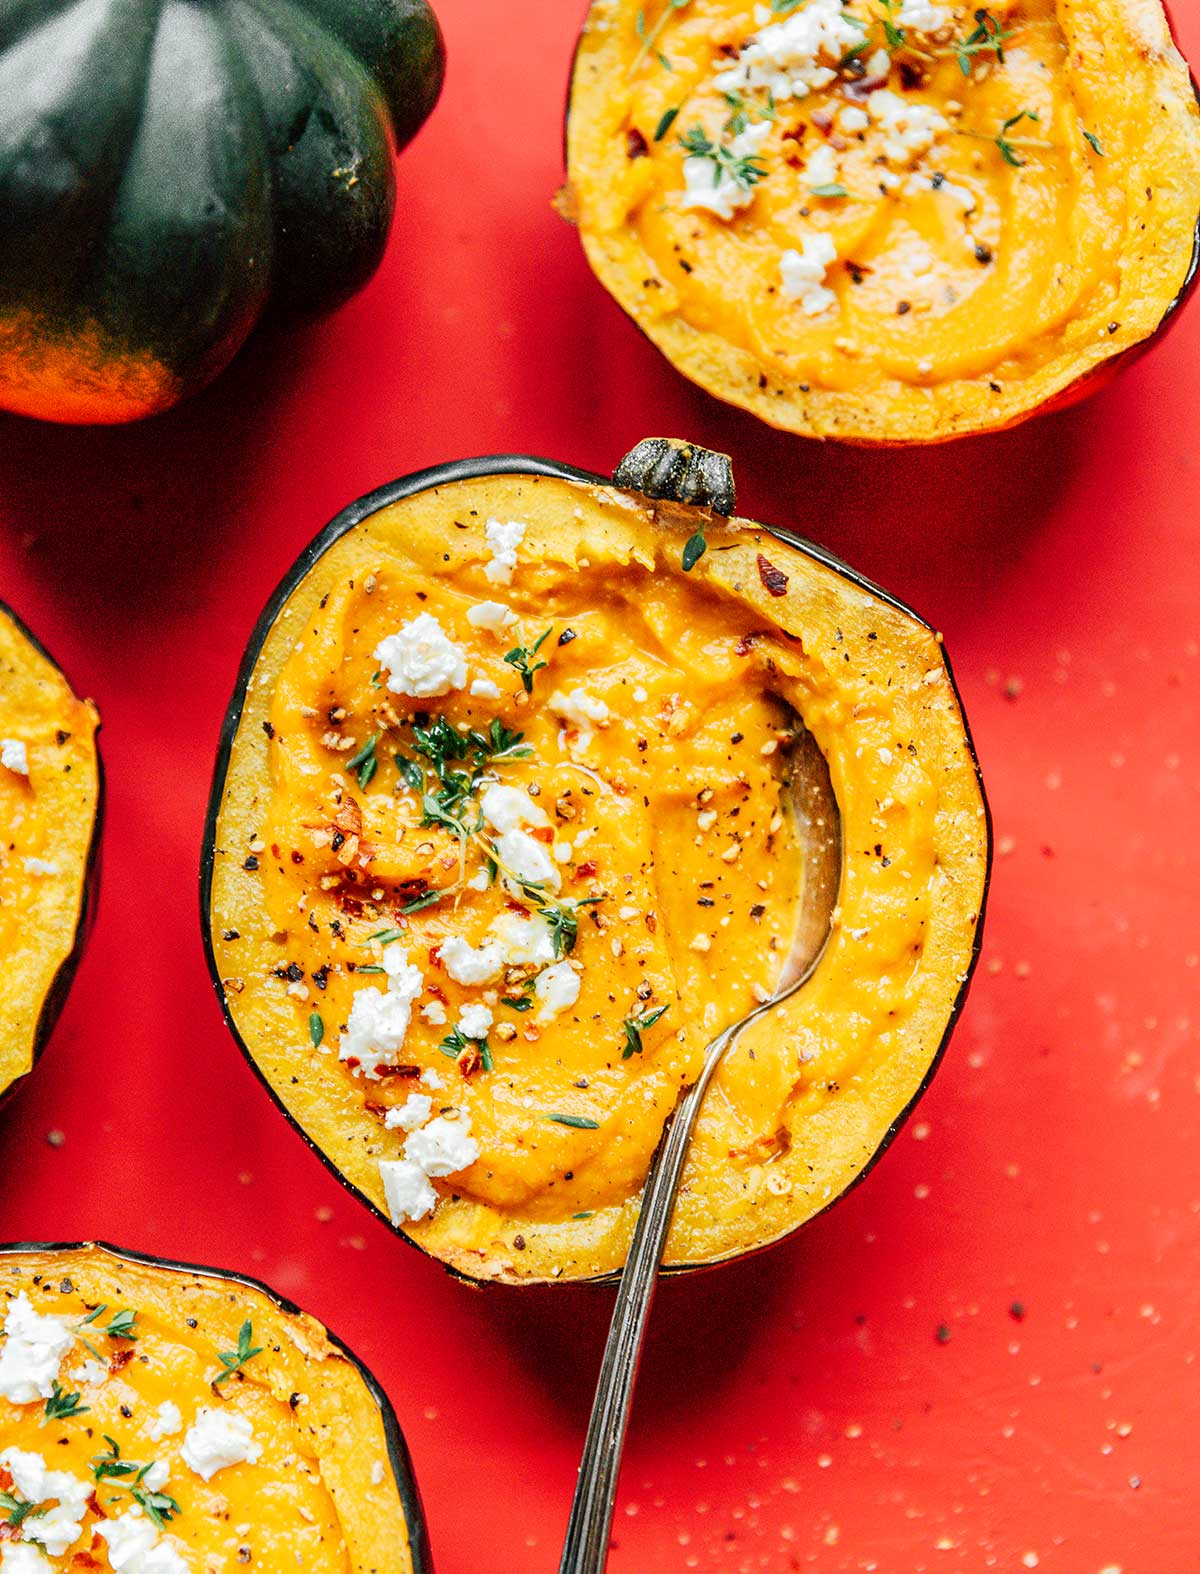 A spoon dipped into an acorn squash half filled with acorn squash soup